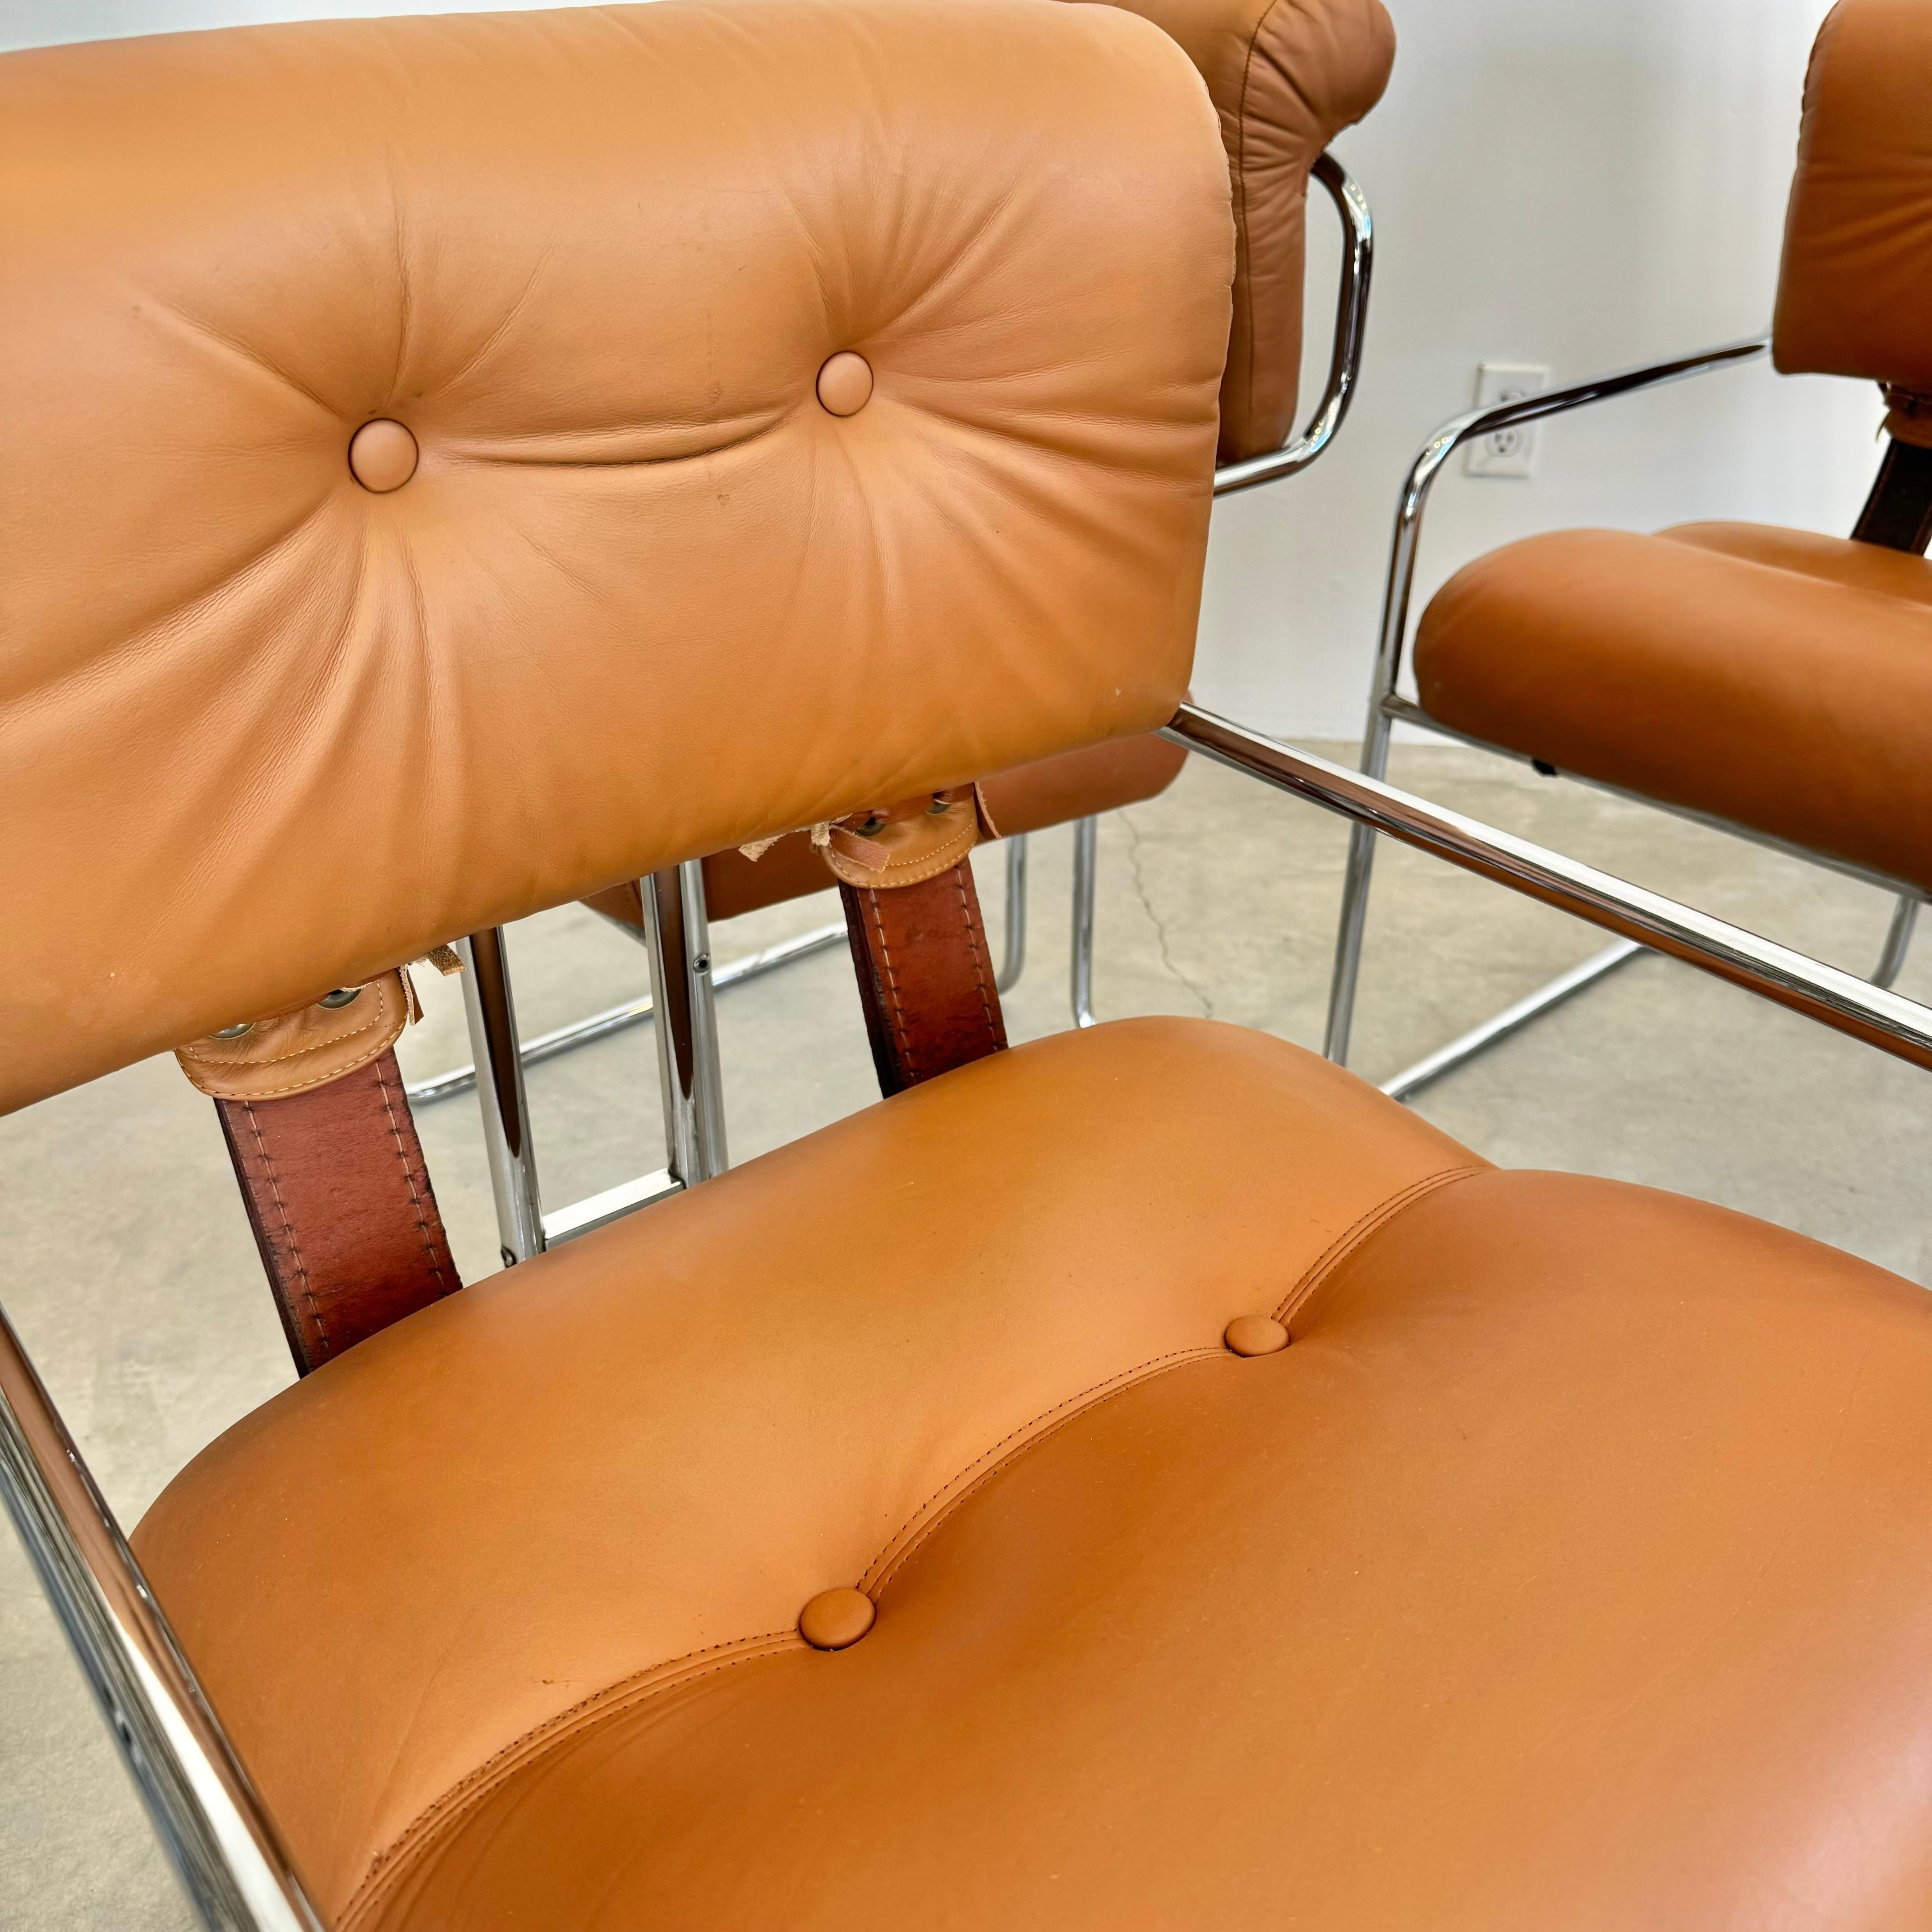 Set of 6 'Tucroma' Chairs in Tan by Guido Faleschini, 1970s Italy For Sale 1